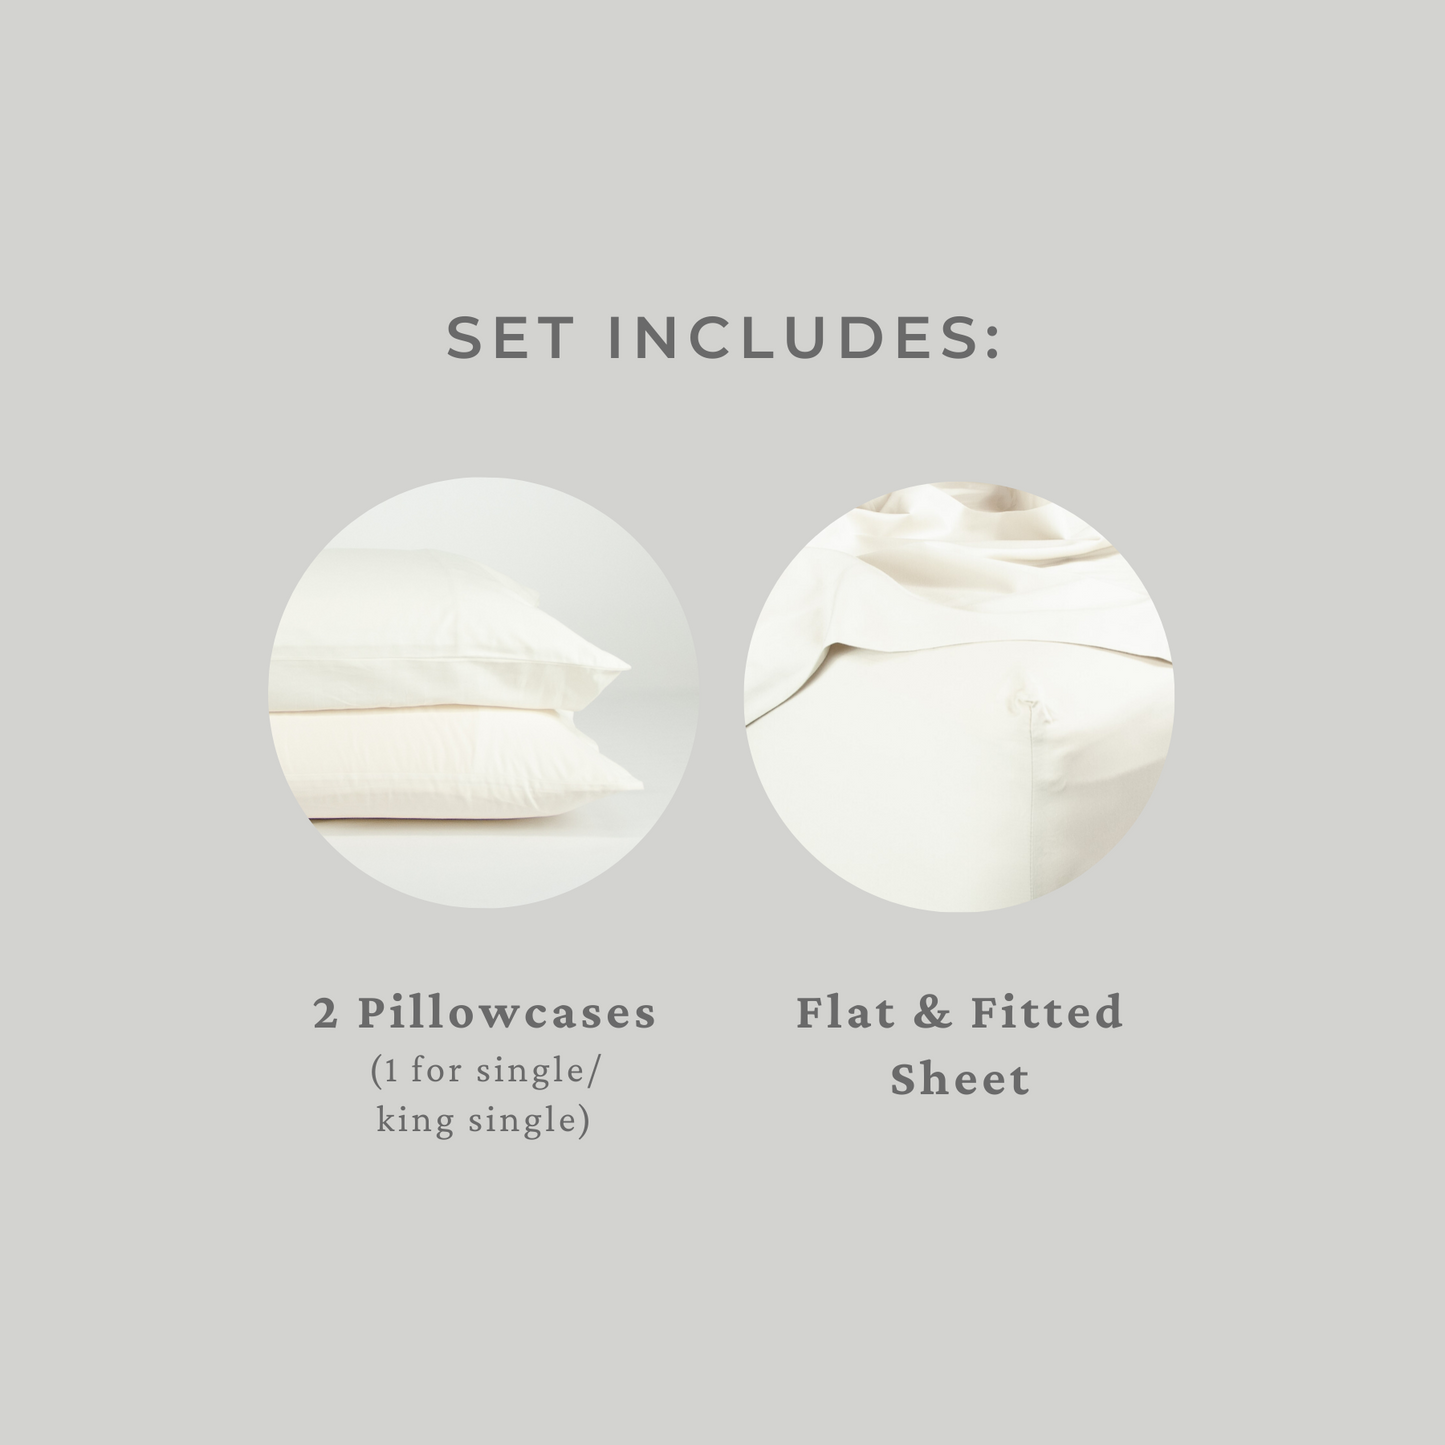 Set includes: flat and fitted sheet, two pillowcases (1 for single or king single)